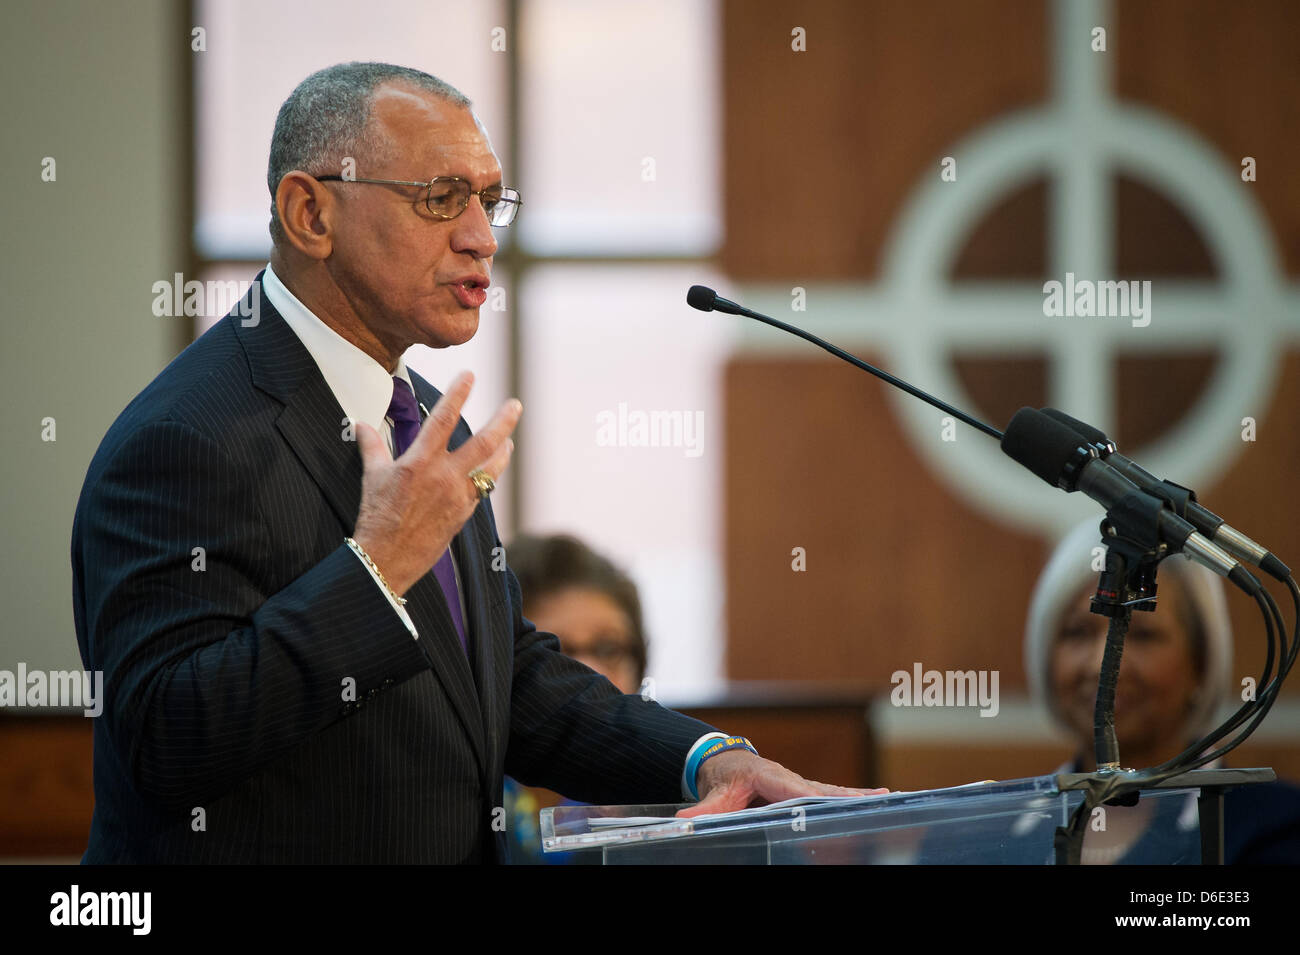 National Aeronautics and Space Administration (NASA) Administrator Charles Bolden speaks and delivers greetings from President Obama at the 44th annual Martin Luther King, Jr. Commemorative Service on Monday, January 16, 2012 at Ebenezer Baptist Church in Atlanta. .Mandatory Credit: Bill Ingalls / NASA via CNP Stock Photo